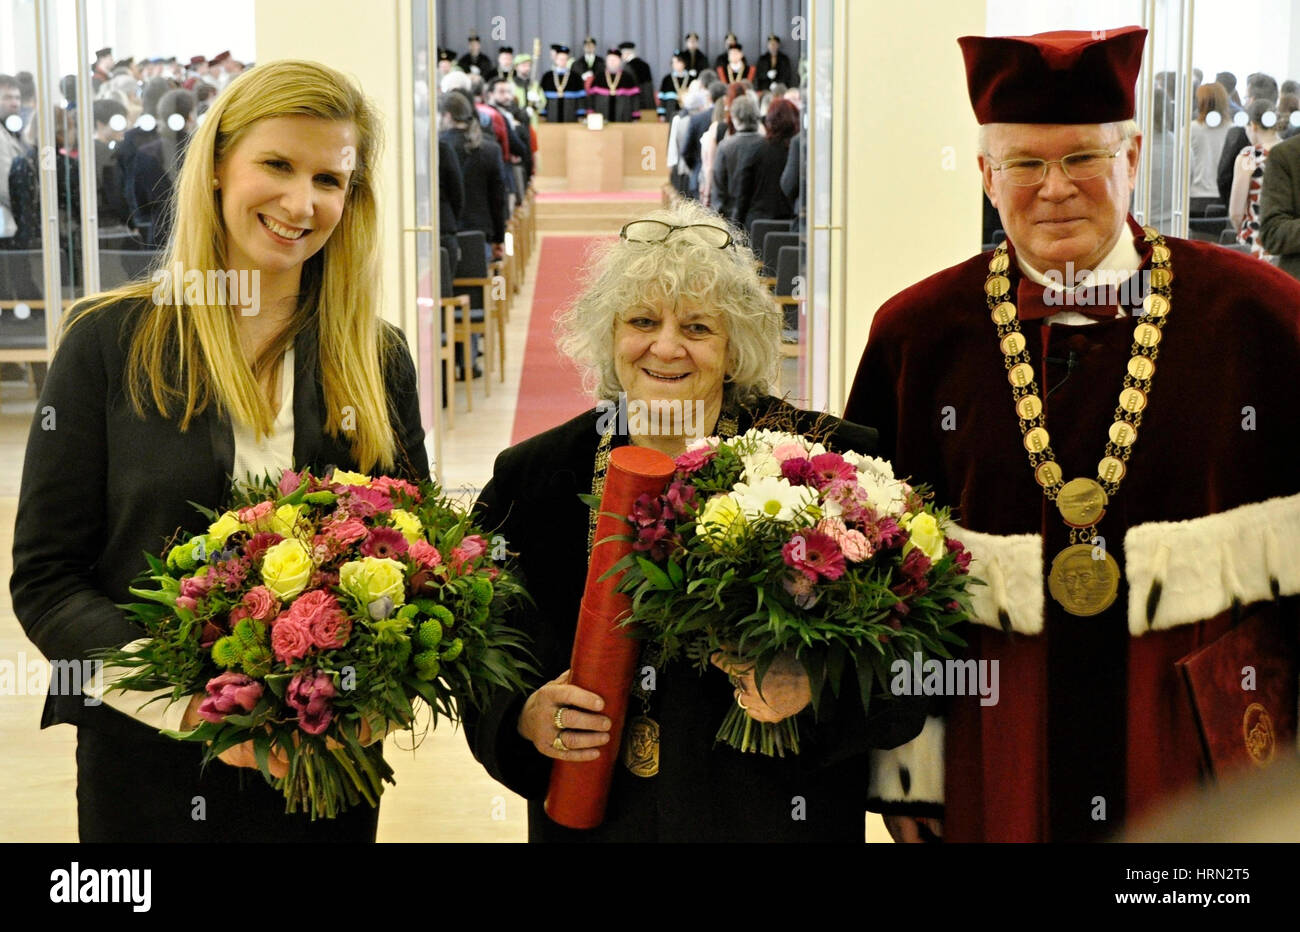 Scientist Ada E. Yonath, 77, centre, who helped uncover the ribosome structure and became the first Israeli woman to win the Nobel Prize, received a honorary doctorate of the Mendel University in Brno today, on Friday, March 3, 2017. On the photo from left: Czech Education Minister Katerina Valachova, Ada E. Yonath and Mendel University Rector Ladislav Havel. (CTK Photo/Jan Tomandl) Stock Photo